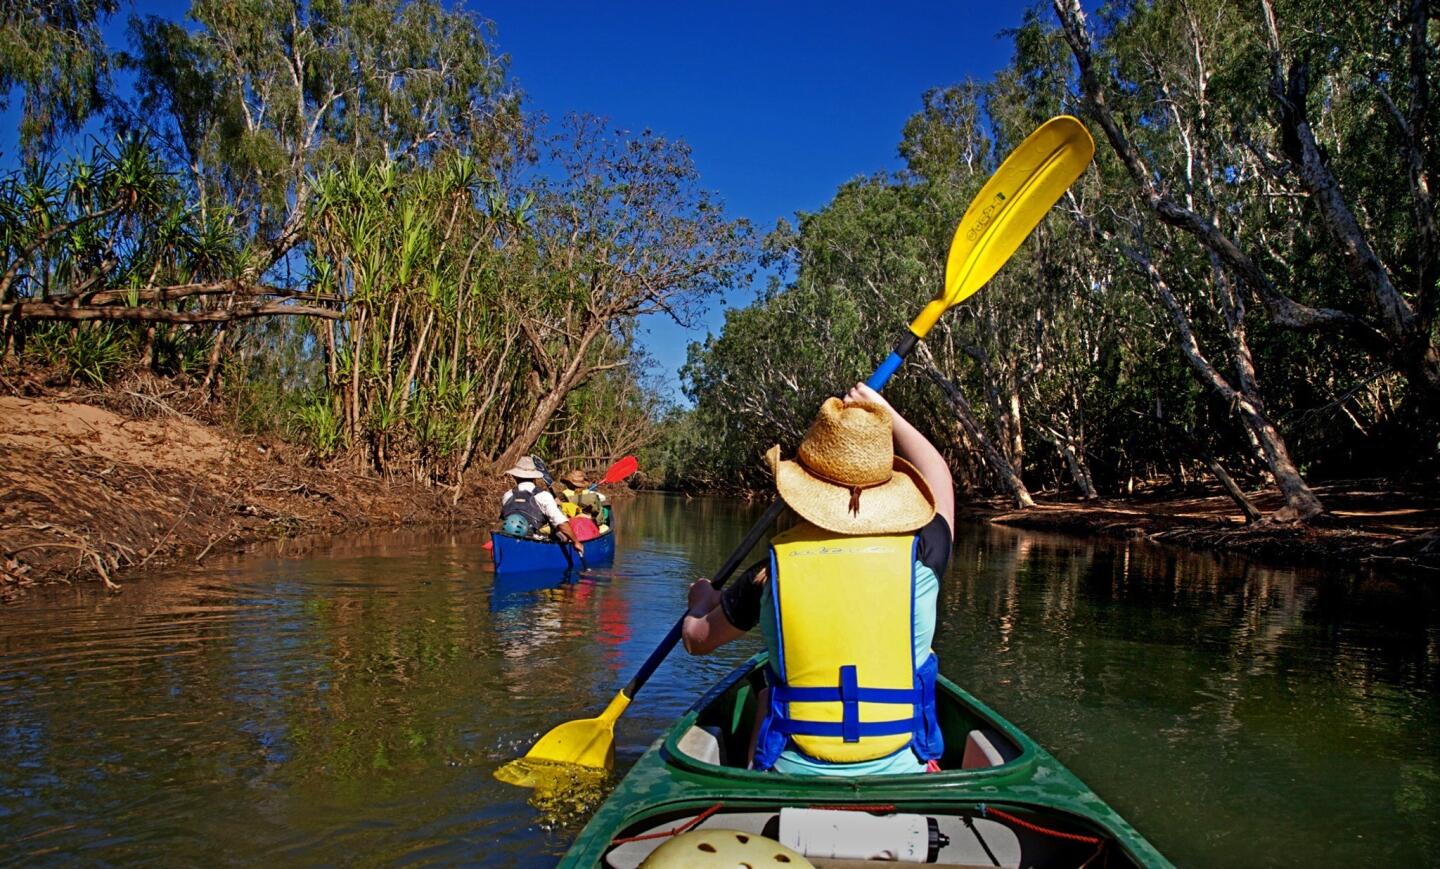 Canoeing on the Katherine River, which flows through Arnhem Land and Kakadu National Park. The river runs through the 13 flaming red-walled gorges that make up the Katherine Gorge of Nitmiluk Park, and past the namesake town of Katherine.